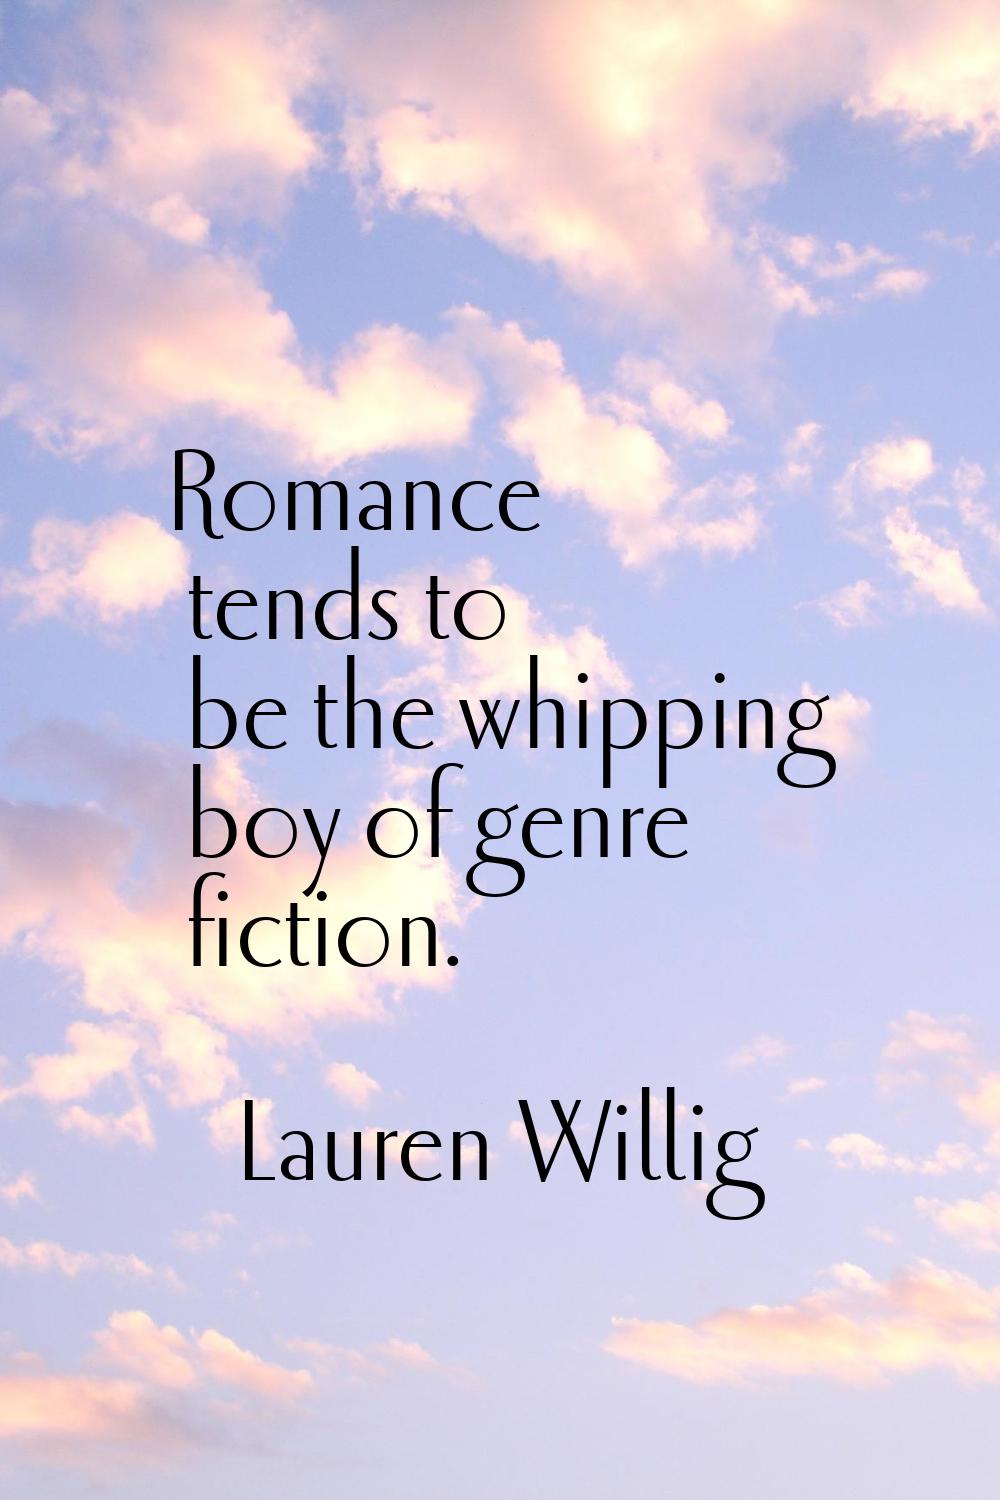 Romance tends to be the whipping boy of genre fiction.